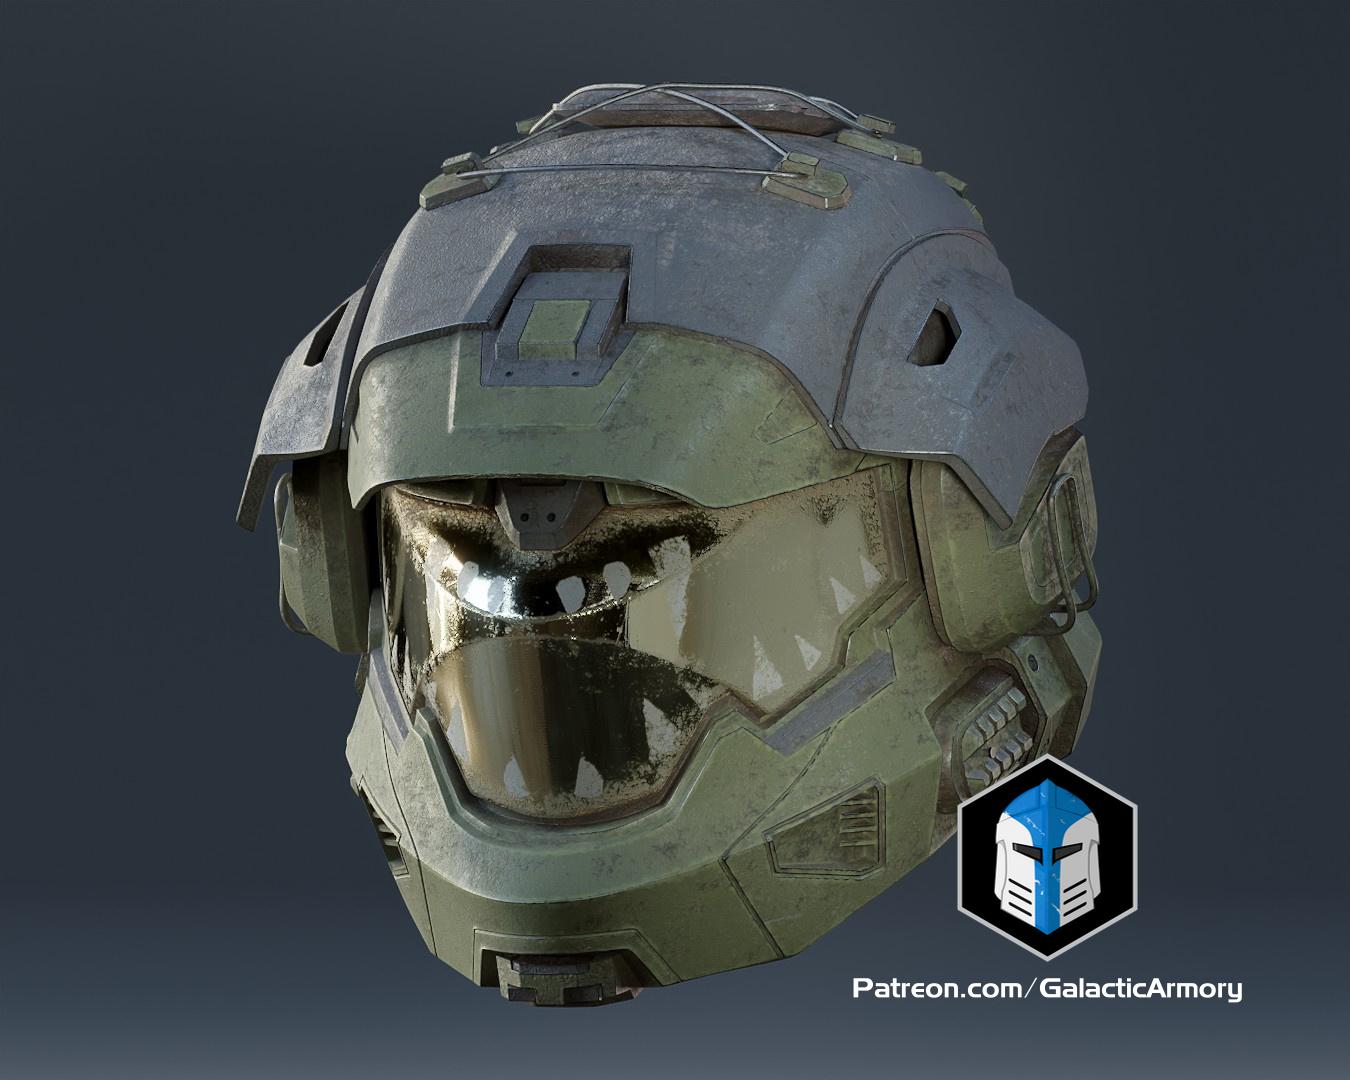 [New Files!] The Halo Artaius helmet has been added to the Specialist rewards!